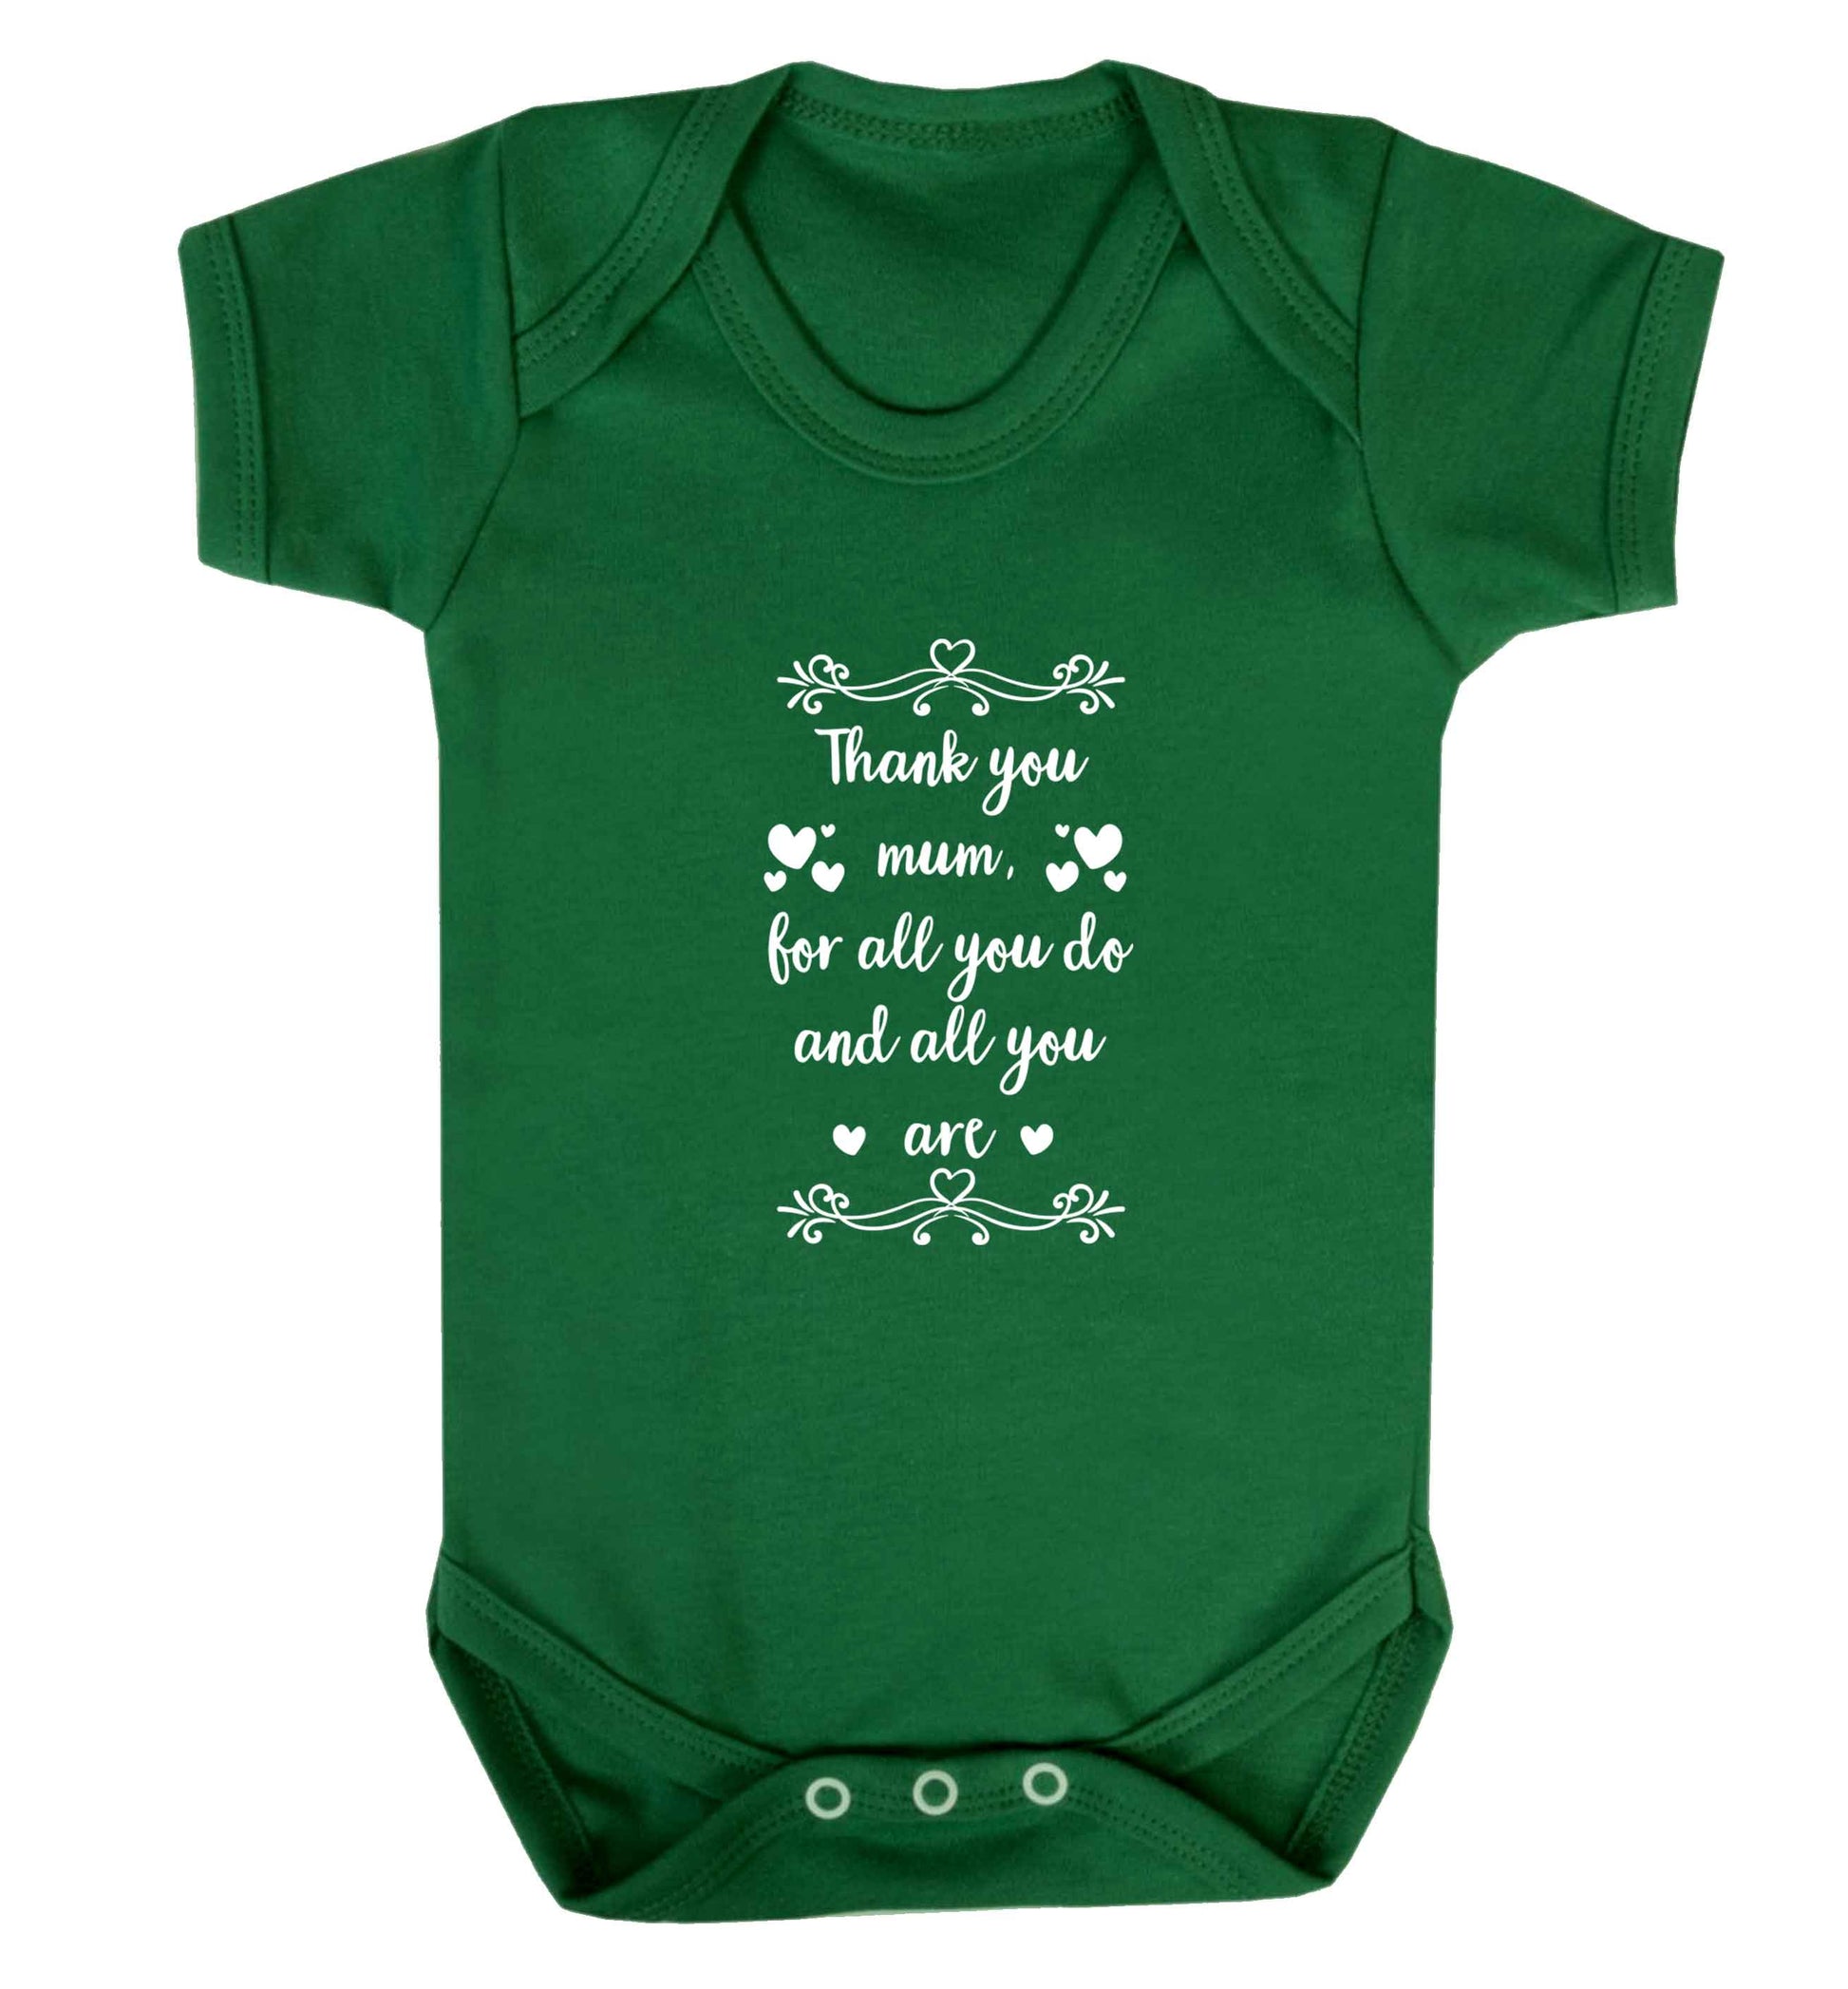 Gorgeous gifts for mums on mother's day! Thank you mum for all you do and all you are baby vest green 18-24 months